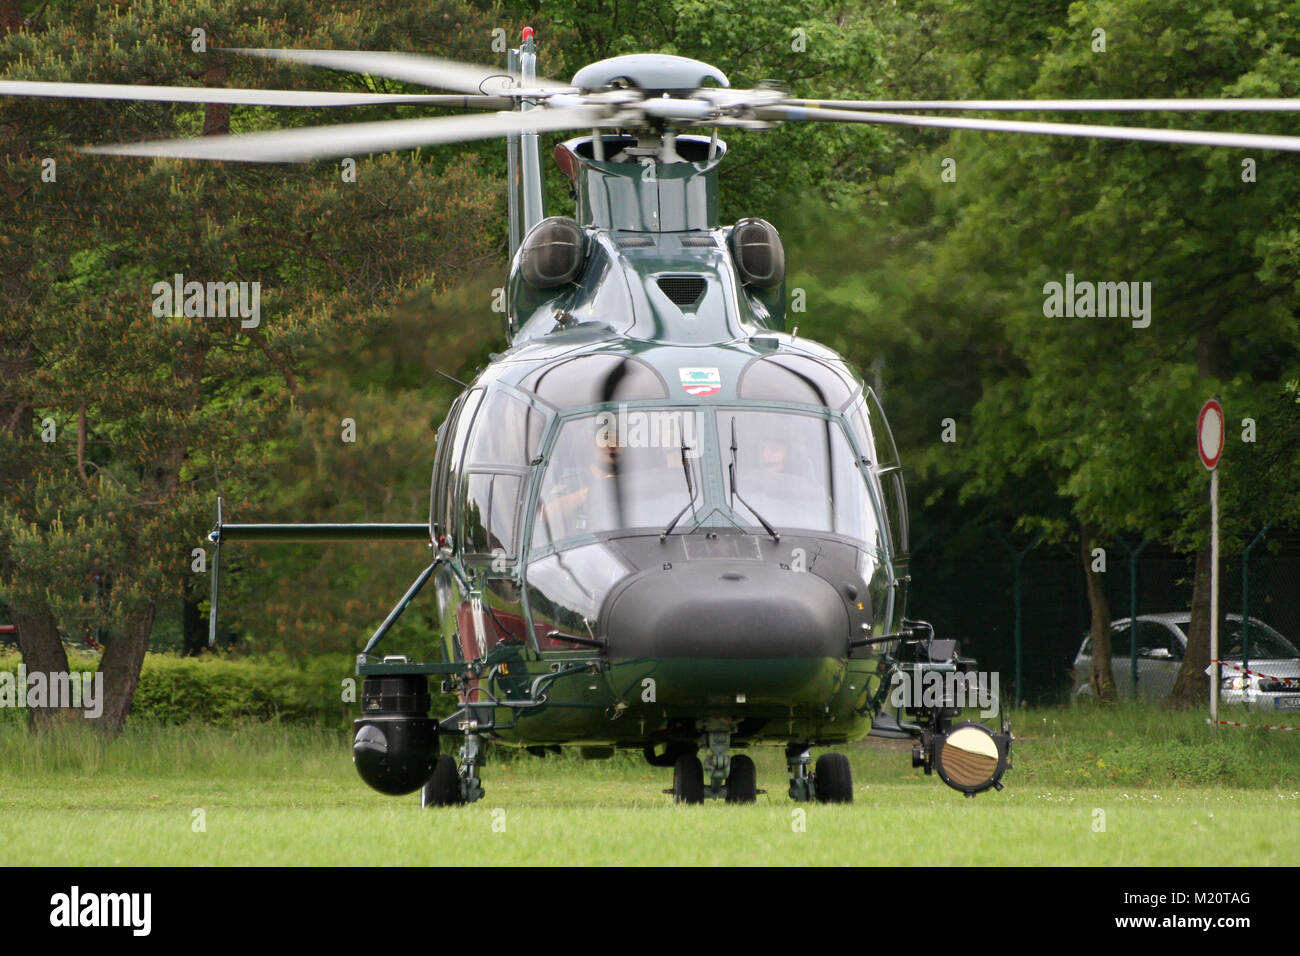 BONN, GERMANY - MAY 22, 2010: German Border patrol EC-155 helicopter of the Bundesgrenzschutz taking off from a grass field at Bonn-Hangelar airport. Stock Photo